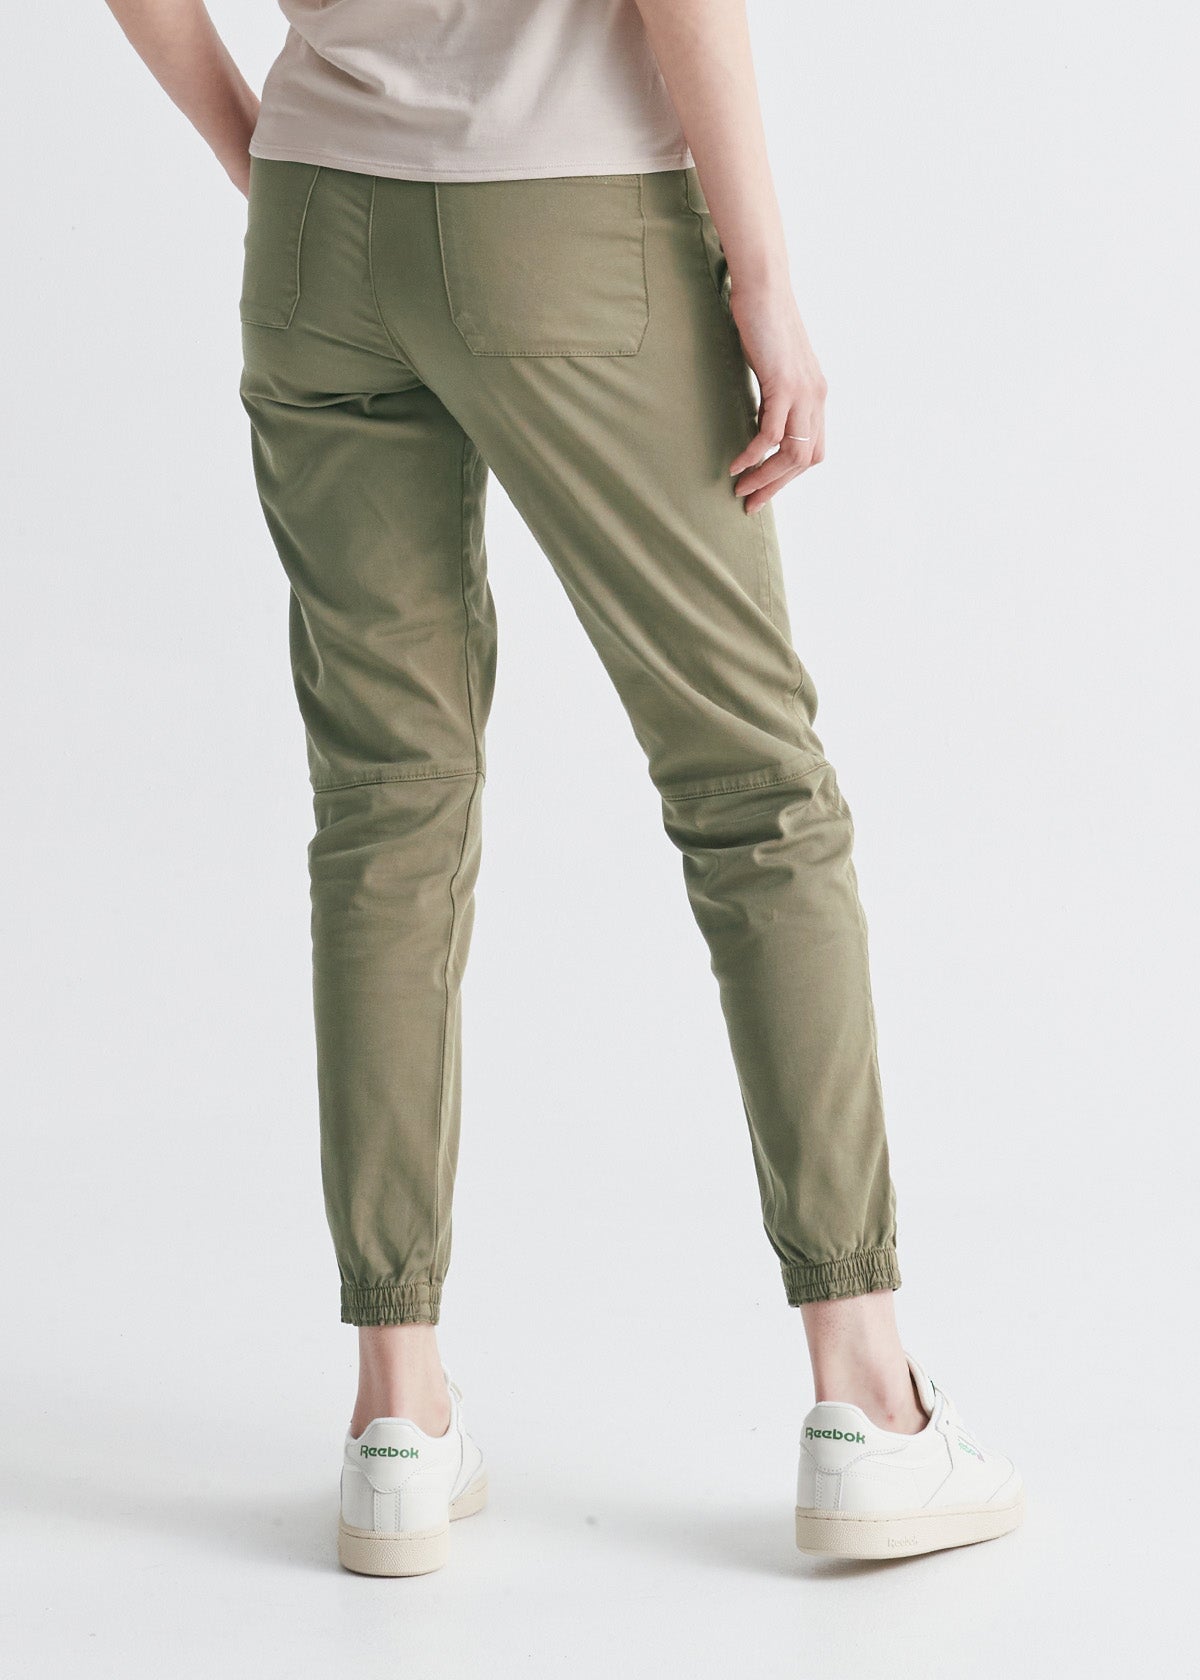 womens high rise green athletic jogger back